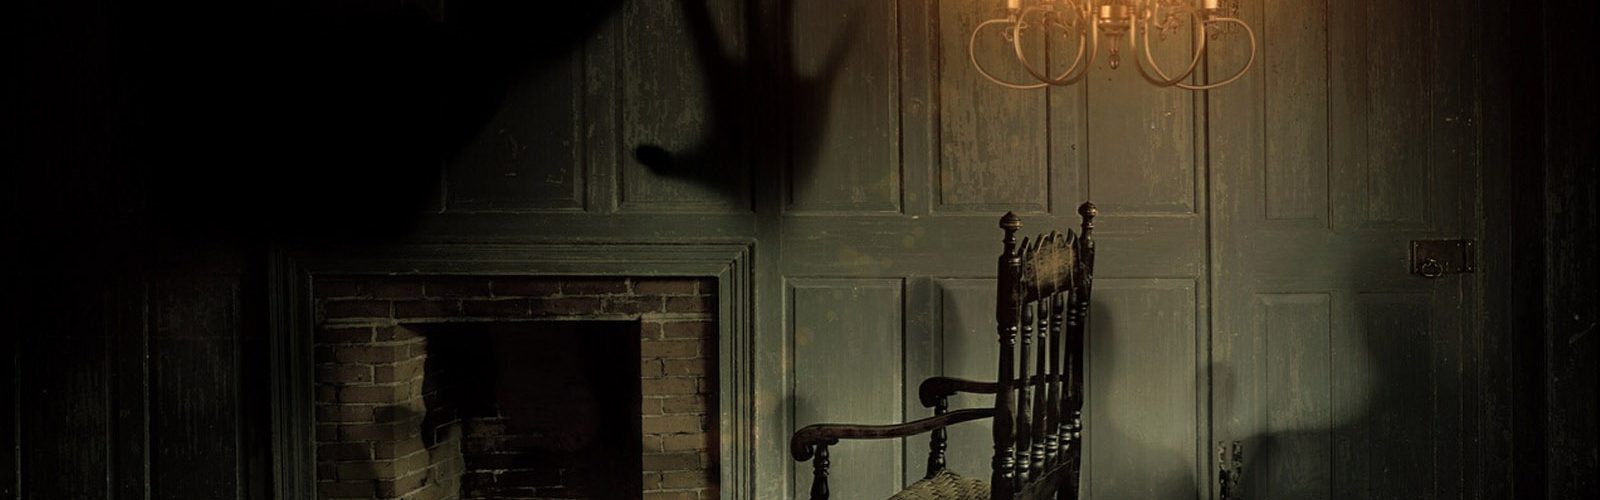 Shadows in a spooky room with a rocking chair